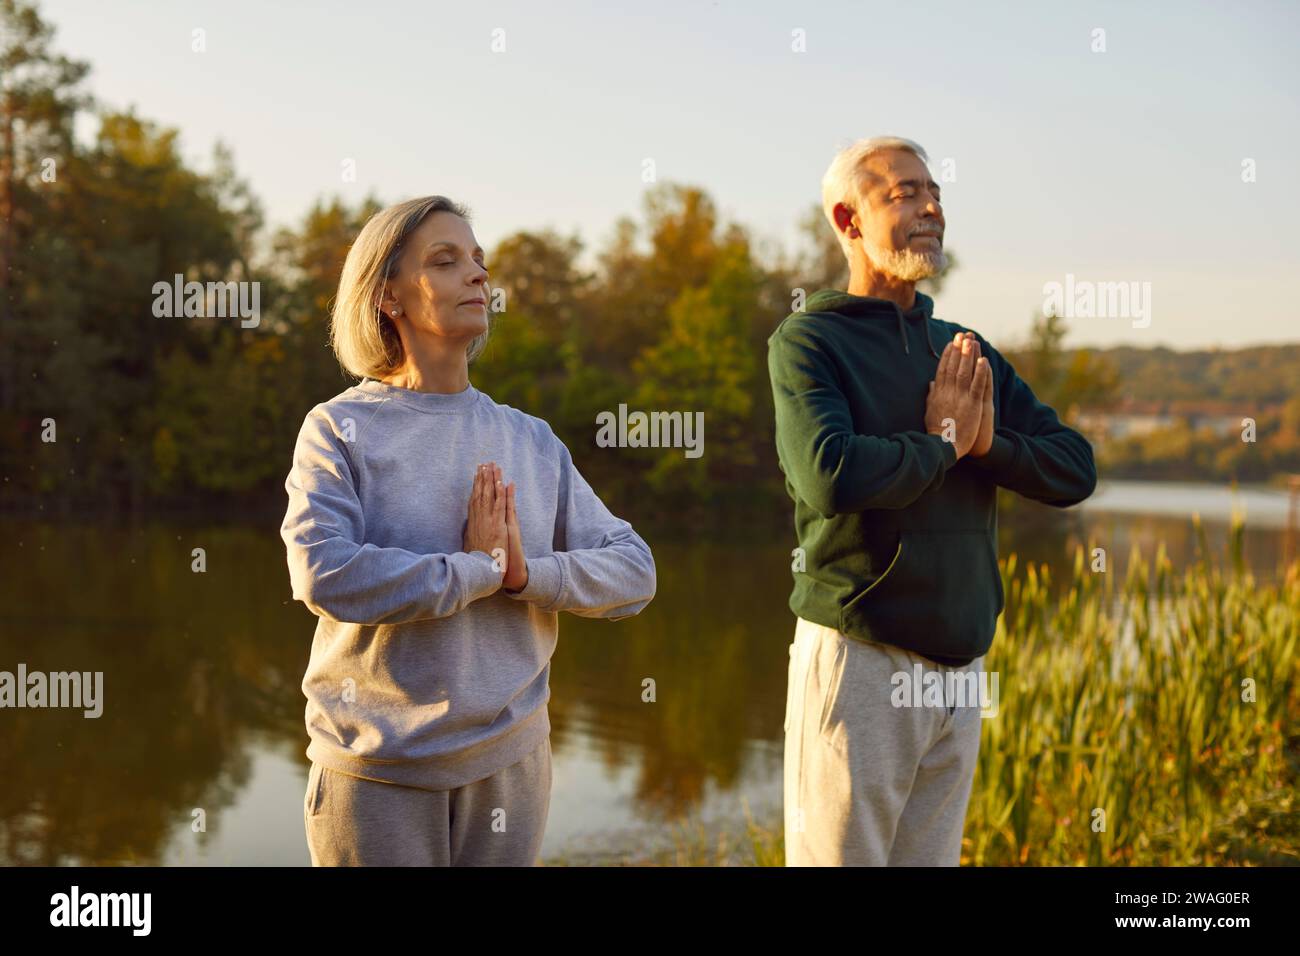 Active senior couple doing yoga exercises in nature. Outdoors fitness concept. Stock Photo